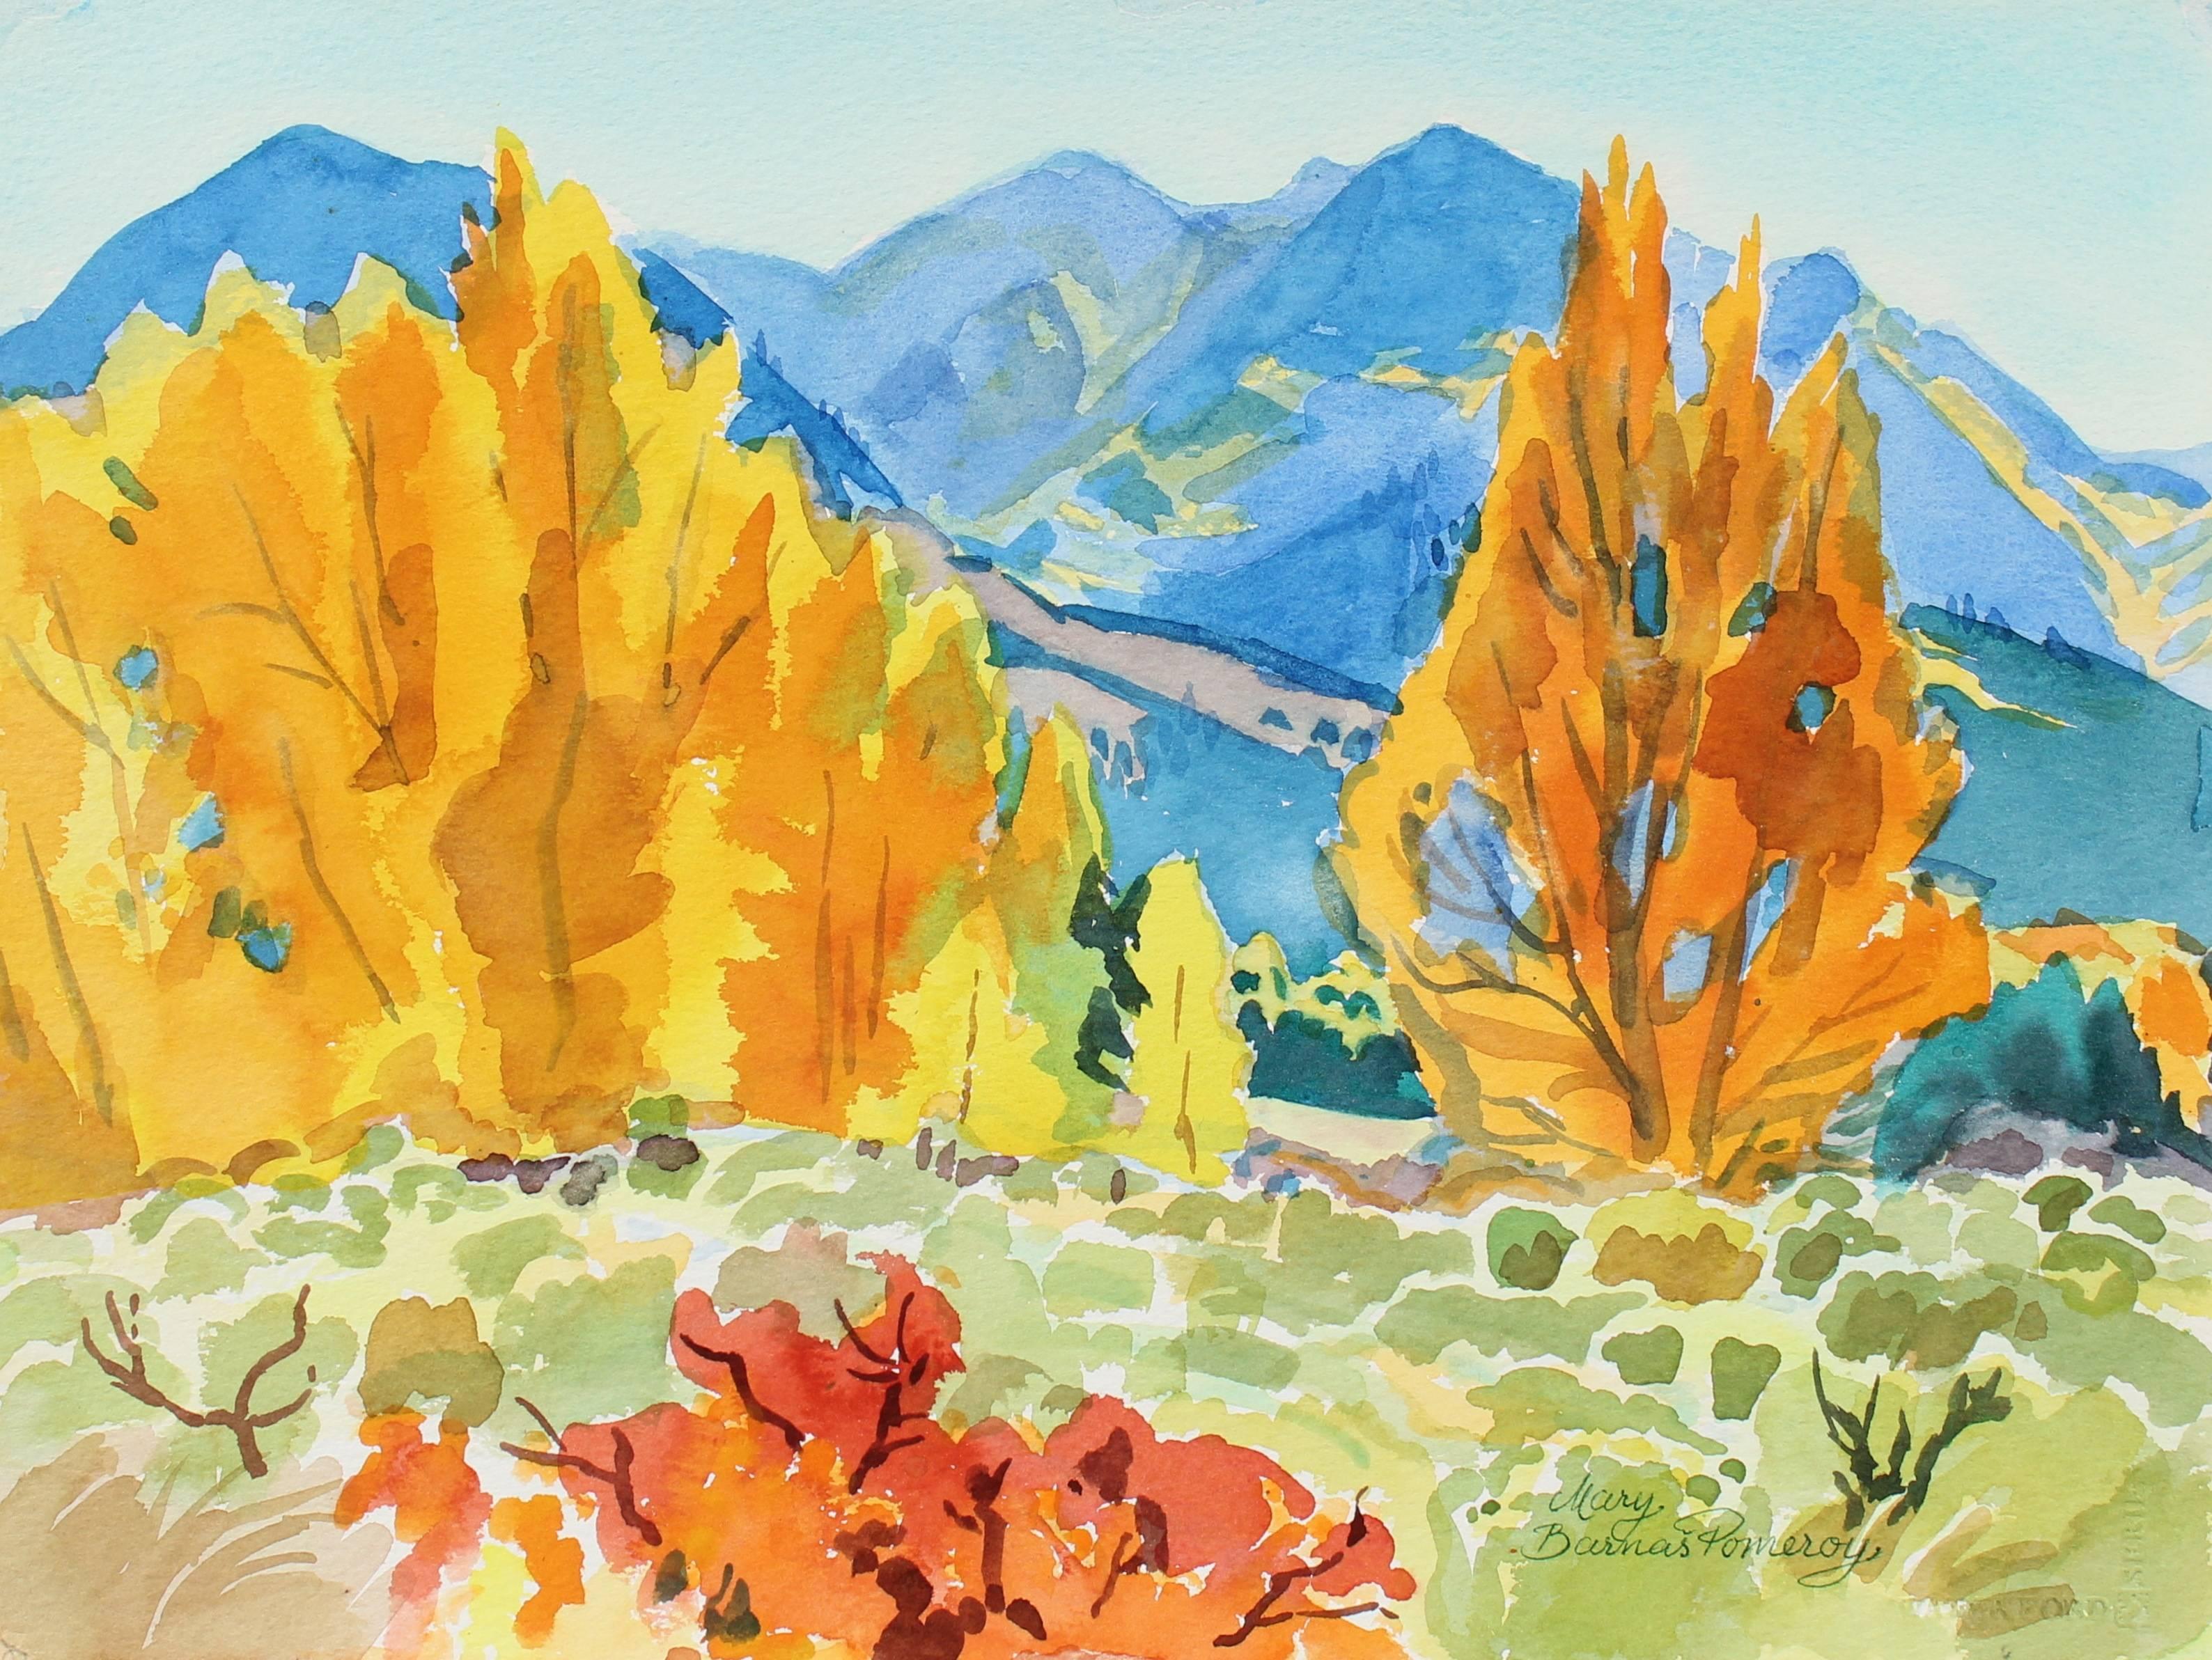 Mary Pomeroy Landscape Art - "Autumn in Great Sand Dunes National Monuments" Landscape Watercolor, 1991